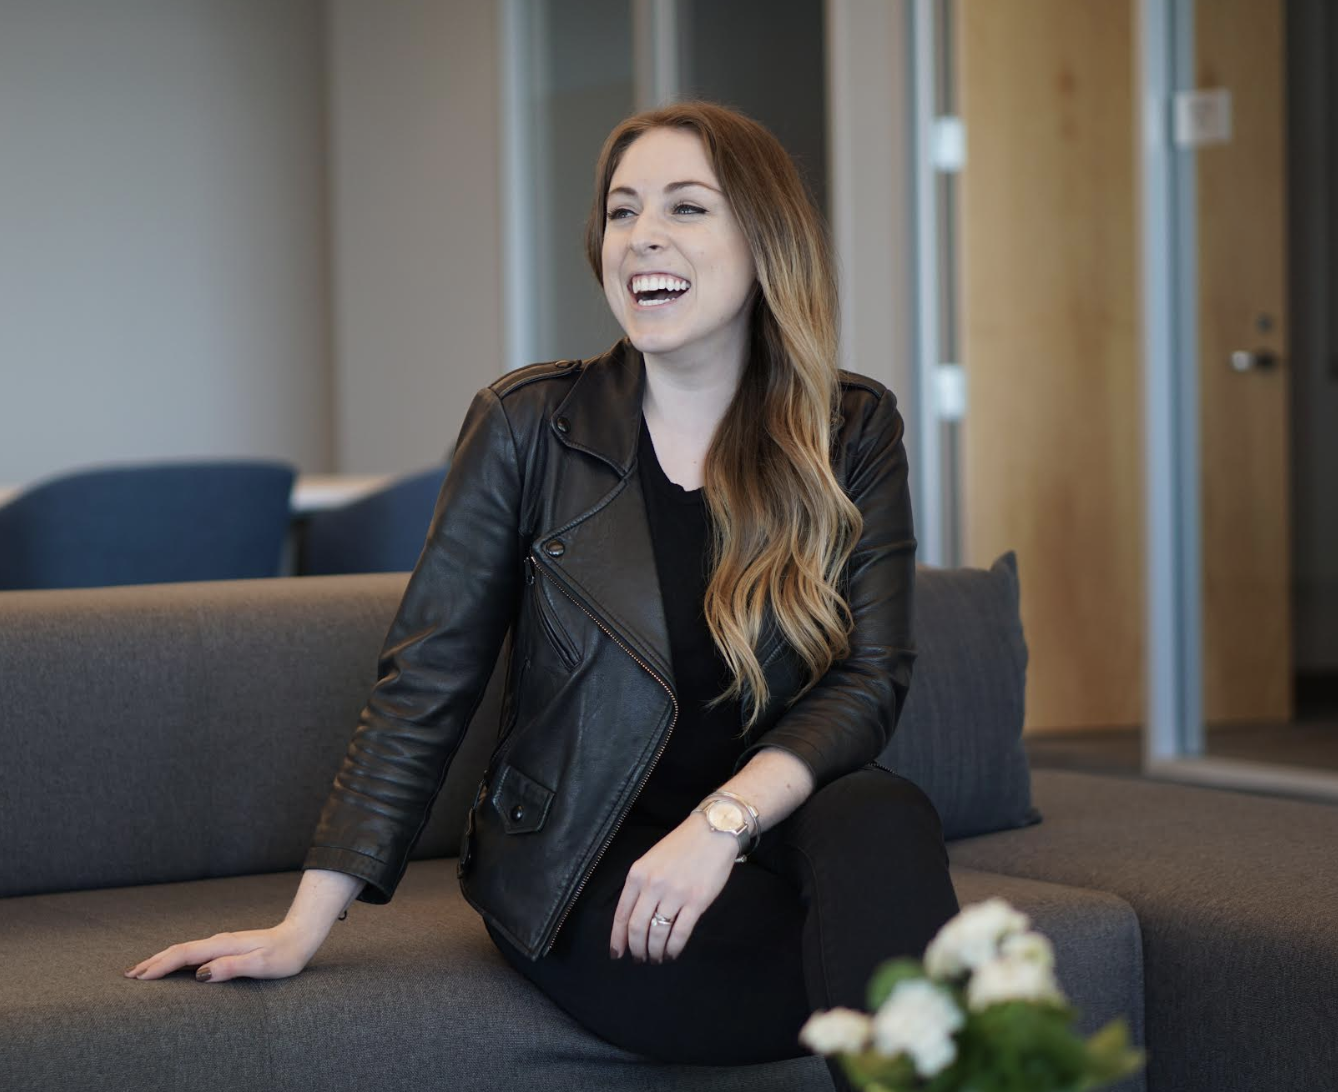 Rachel Tobac, Social Engineer sits on grey couch in office building, laughing